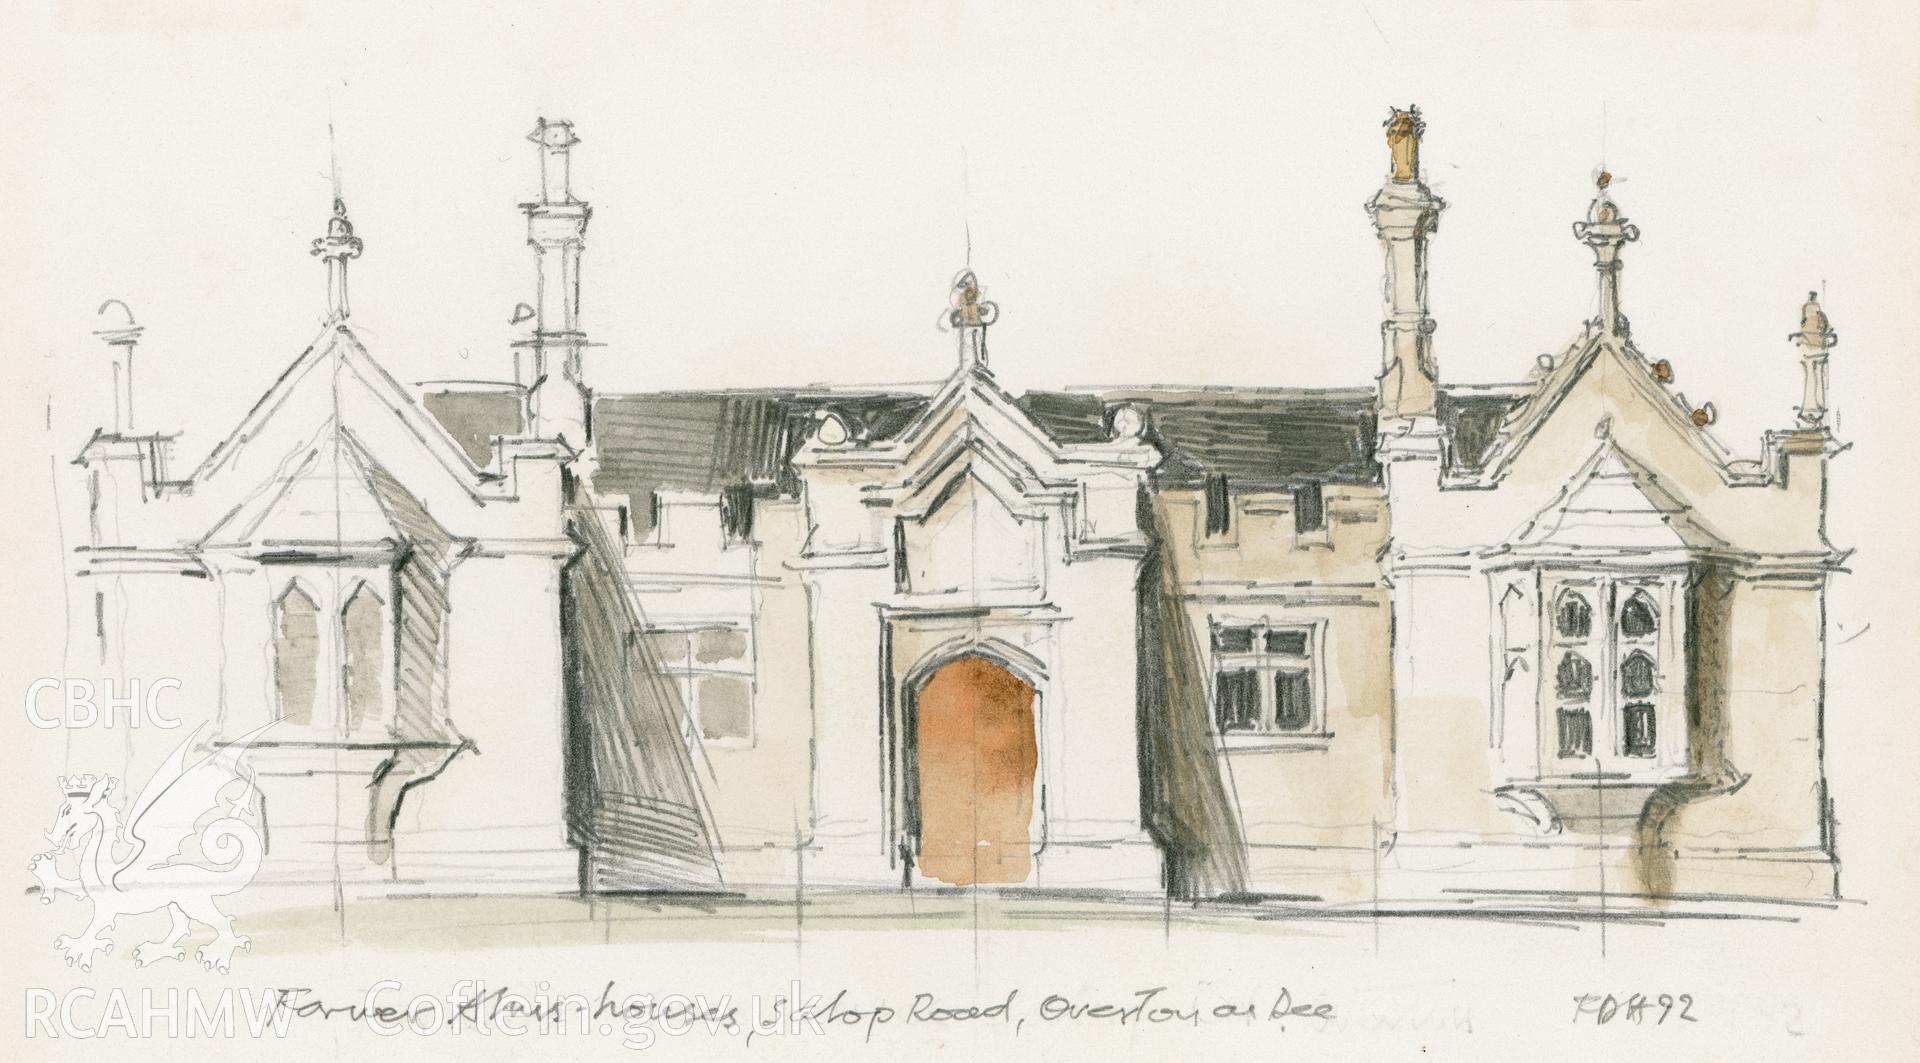 Overton-on-Dee: (pencil and watercolour) drawing, Former Almshouses.